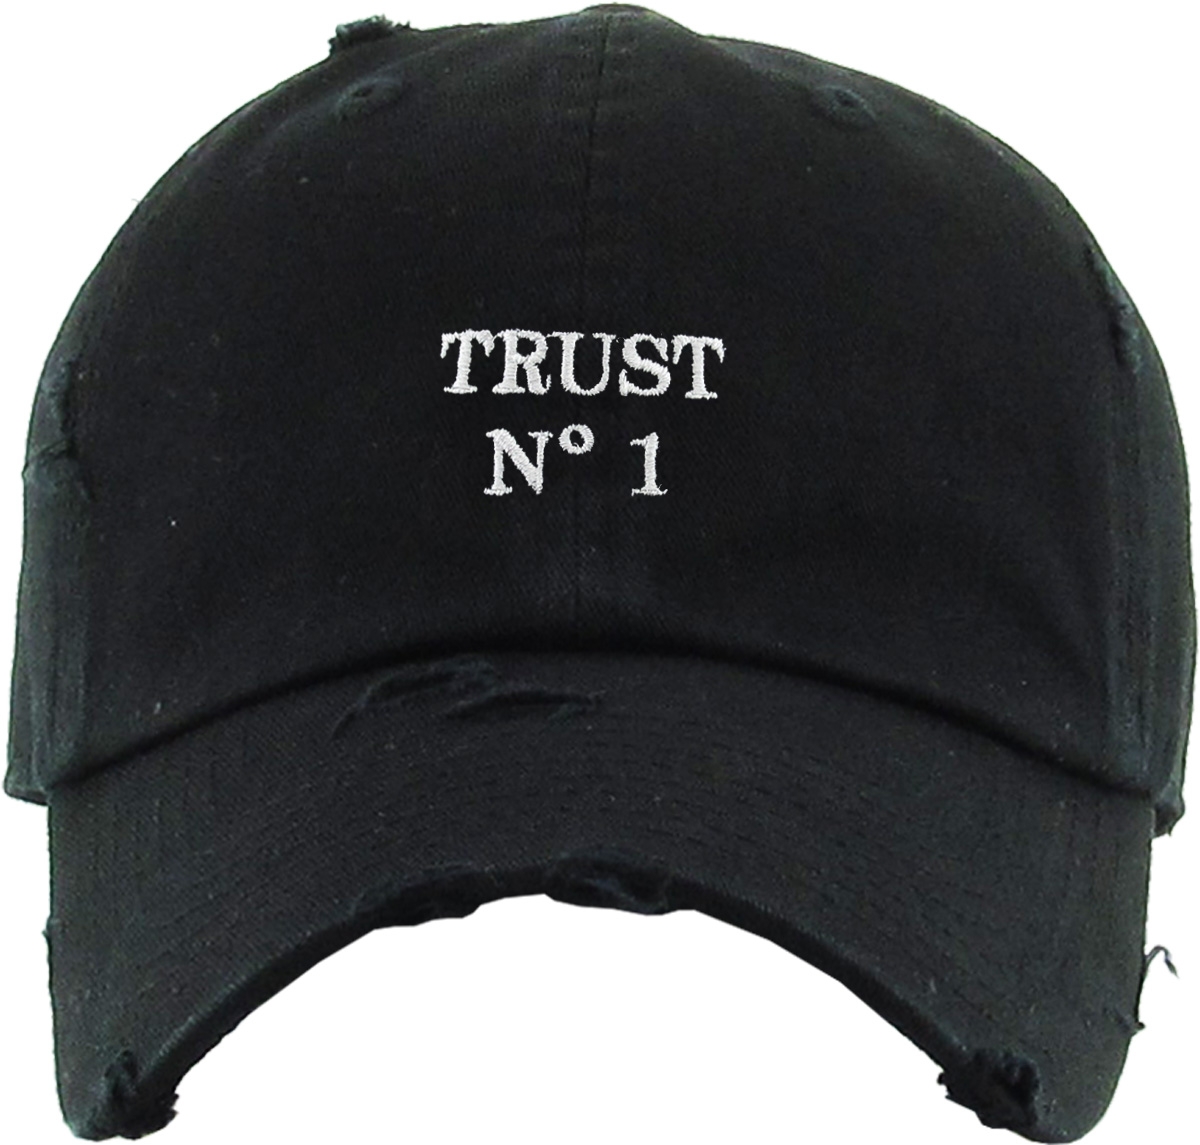 Trust No 1 Vintage Distressed Dad Hat Baseball Cap Polo Style - image 2 of 4